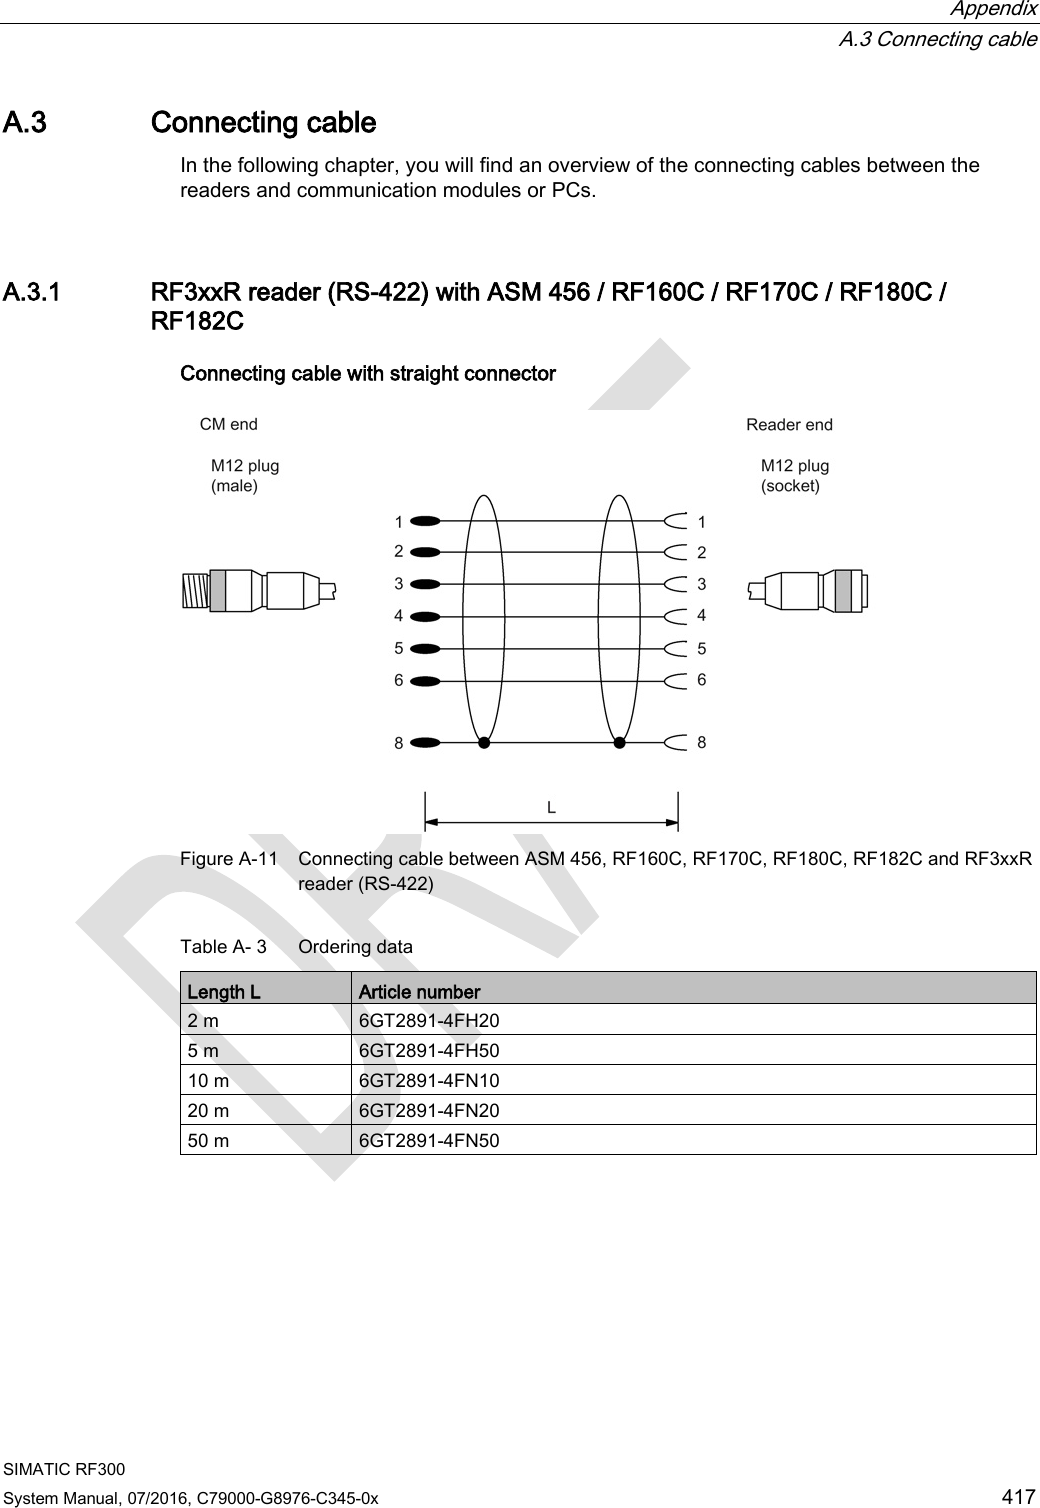  Appendix  A.3 Connecting cable SIMATIC RF300 System Manual, 07/2016, C79000-G8976-C345-0x 417 A.3 Connecting cable In the following chapter, you will find an overview of the connecting cables between the readers and communication modules or PCs.     A.3.1 RF3xxR reader (RS-422) with ASM 456 / RF160C / RF170C / RF180C / RF182C Connecting cable with straight connector  Figure A-11 Connecting cable between ASM 456, RF160C, RF170C, RF180C, RF182C and RF3xxR reader (RS-422) Table A- 3  Ordering data Length L Article number 2 m 6GT2891-4FH20 5 m 6GT2891-4FH50 10 m 6GT2891-4FN10 20 m 6GT2891-4FN20 50 m 6GT2891-4FN50    